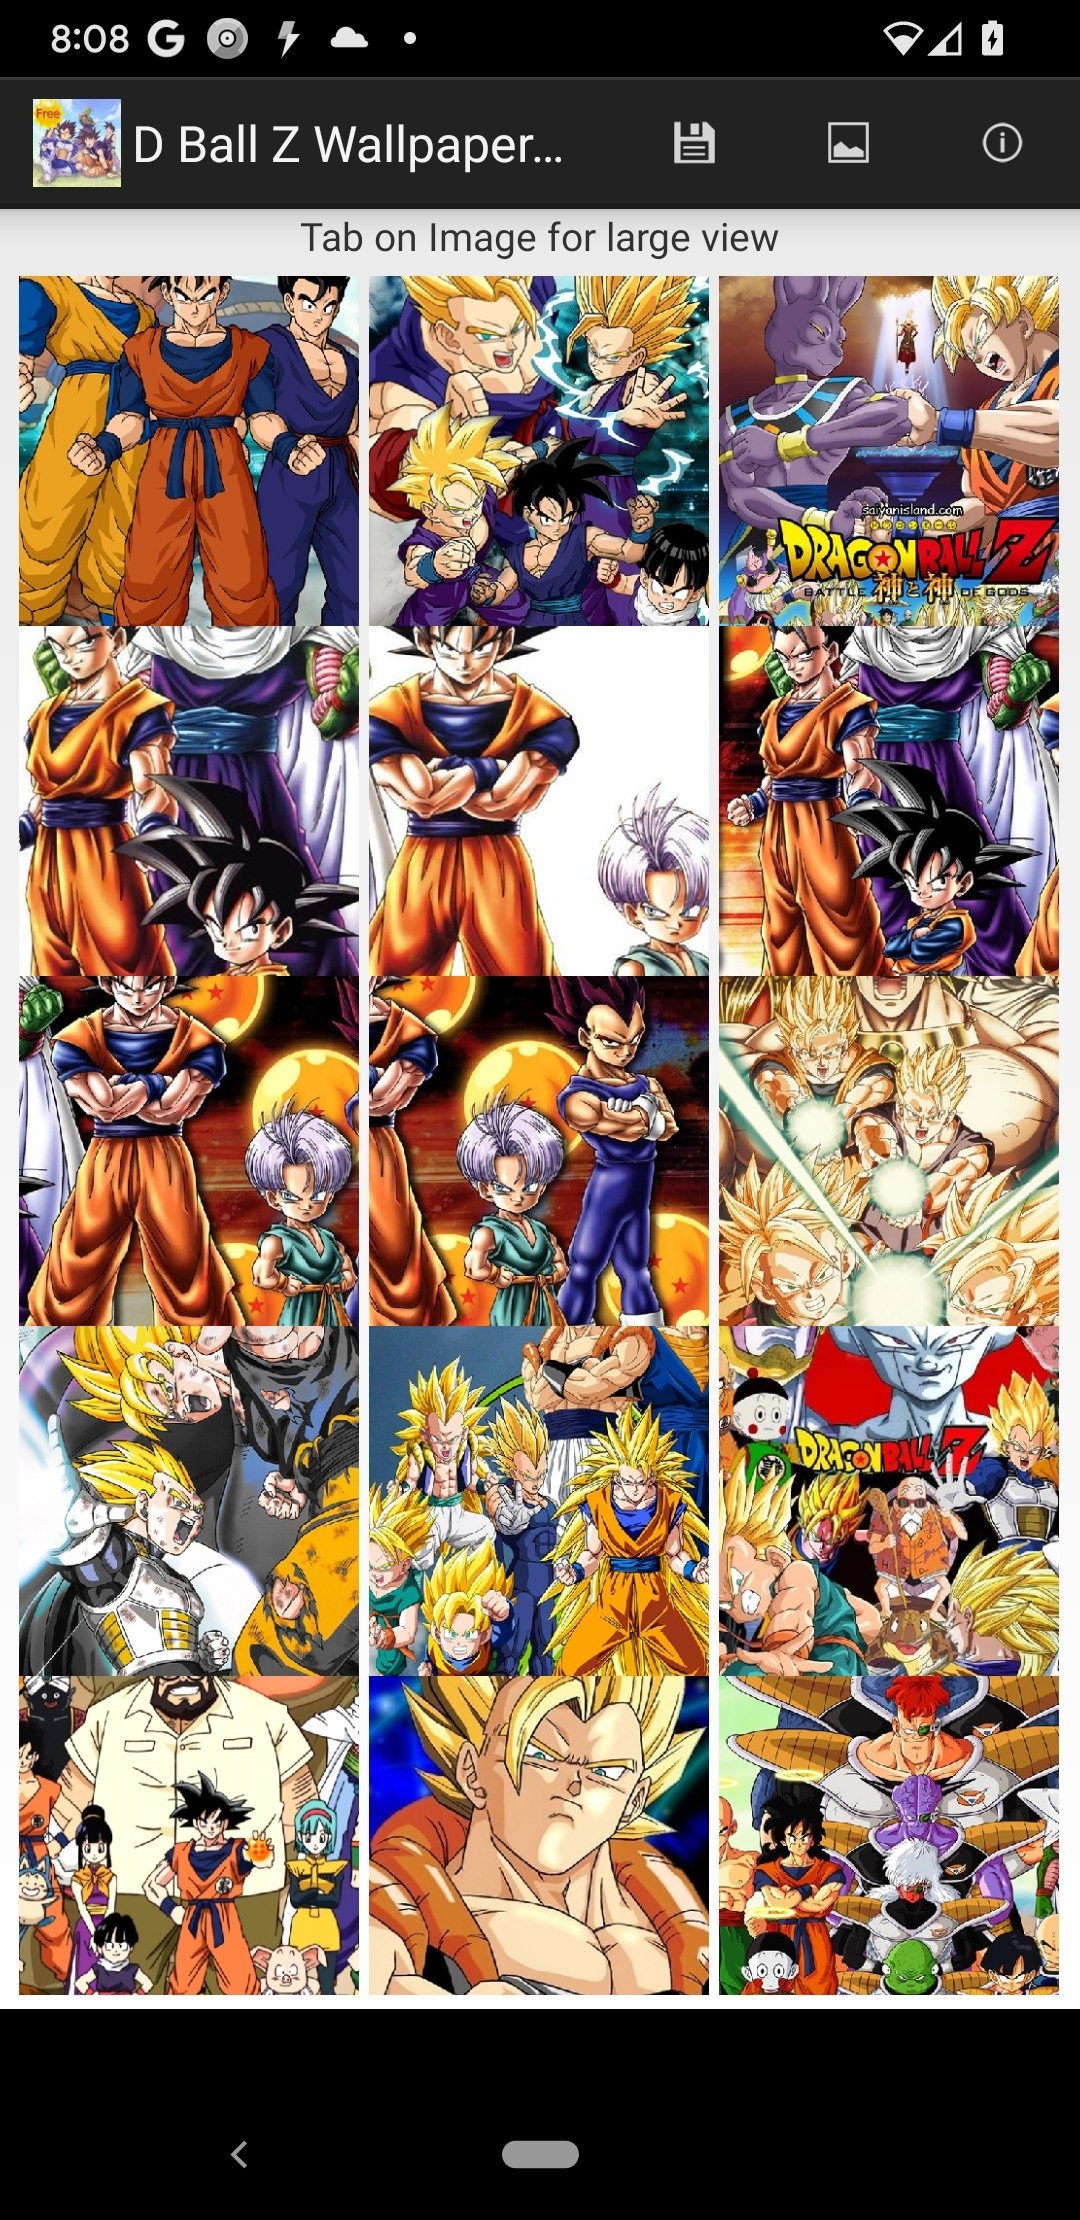 D Ball Z Wallpaper 10 Download For Android Apk Free